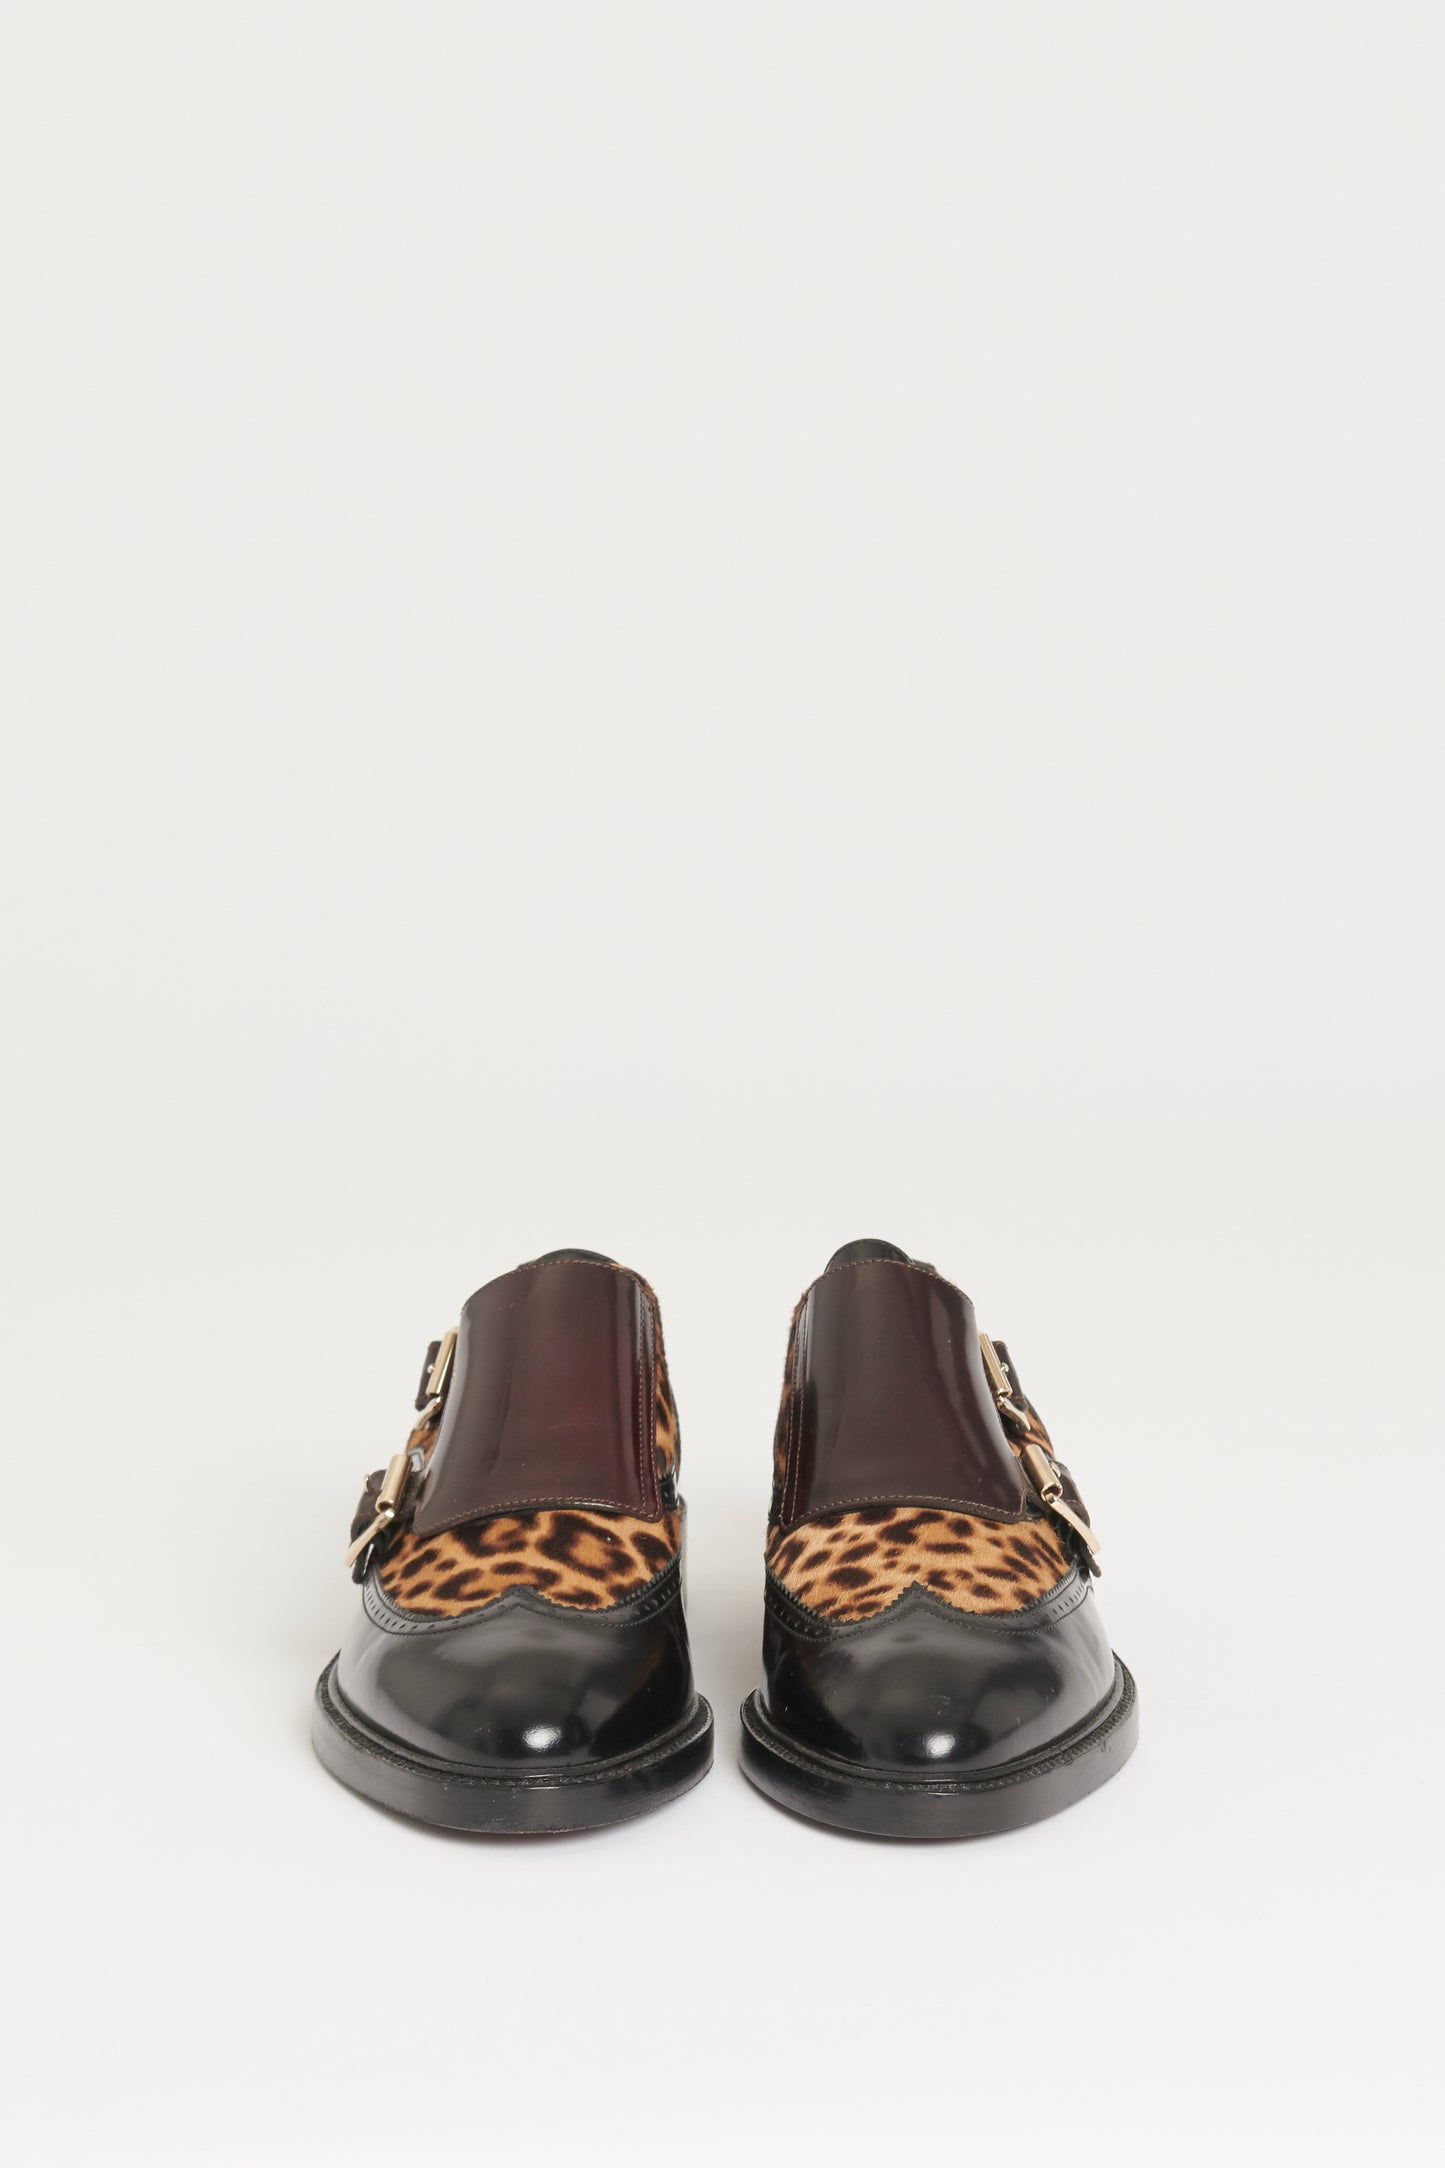 Brown/Beige Leather 'Sunningford' Leopard Print Loafers